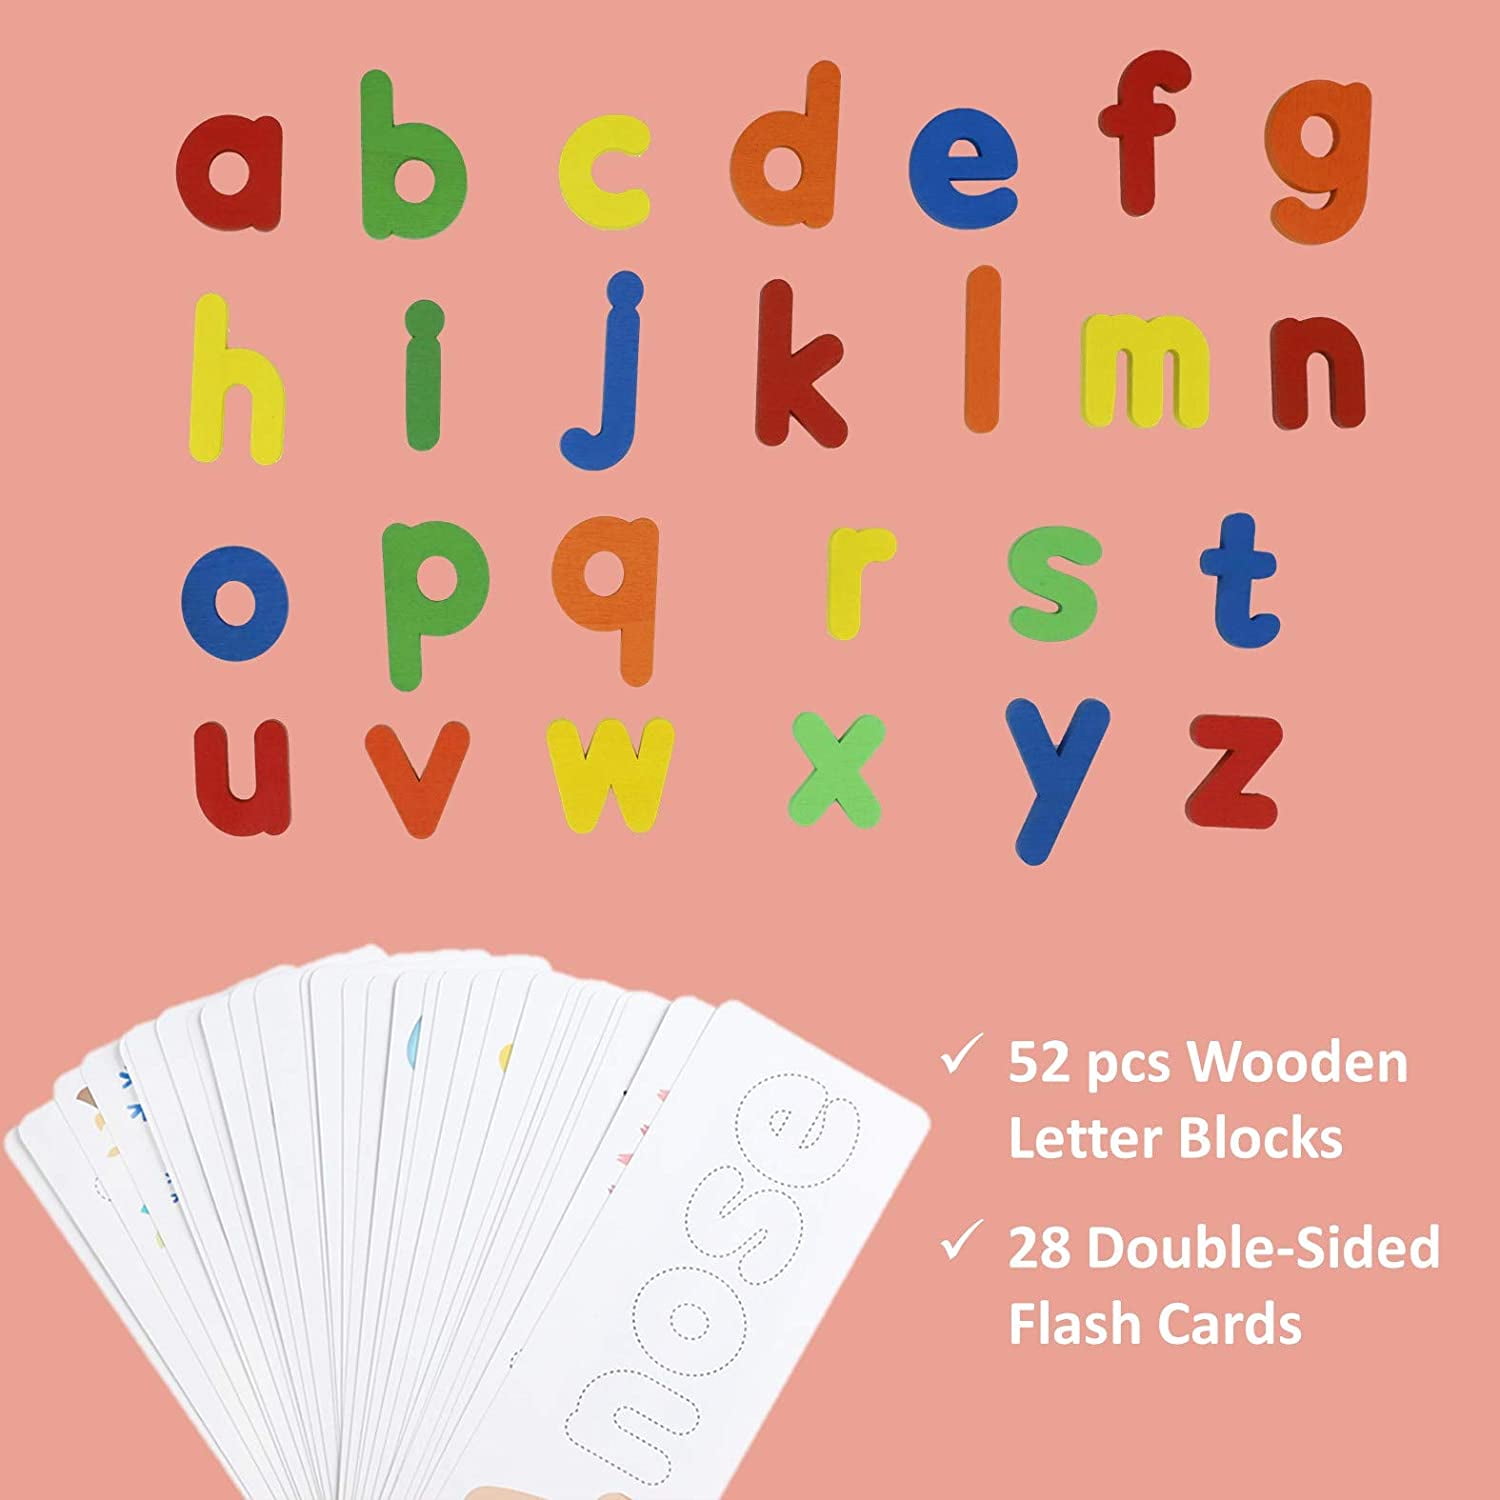 USATDD Matching Letter Spelling and Learning Game with Words Flash Card Alphabet ABC Learning Educational Montessori Puzzle Gift for Preschool Kindergarten Kids Boys Girls Age 3 4 5 Years Old 